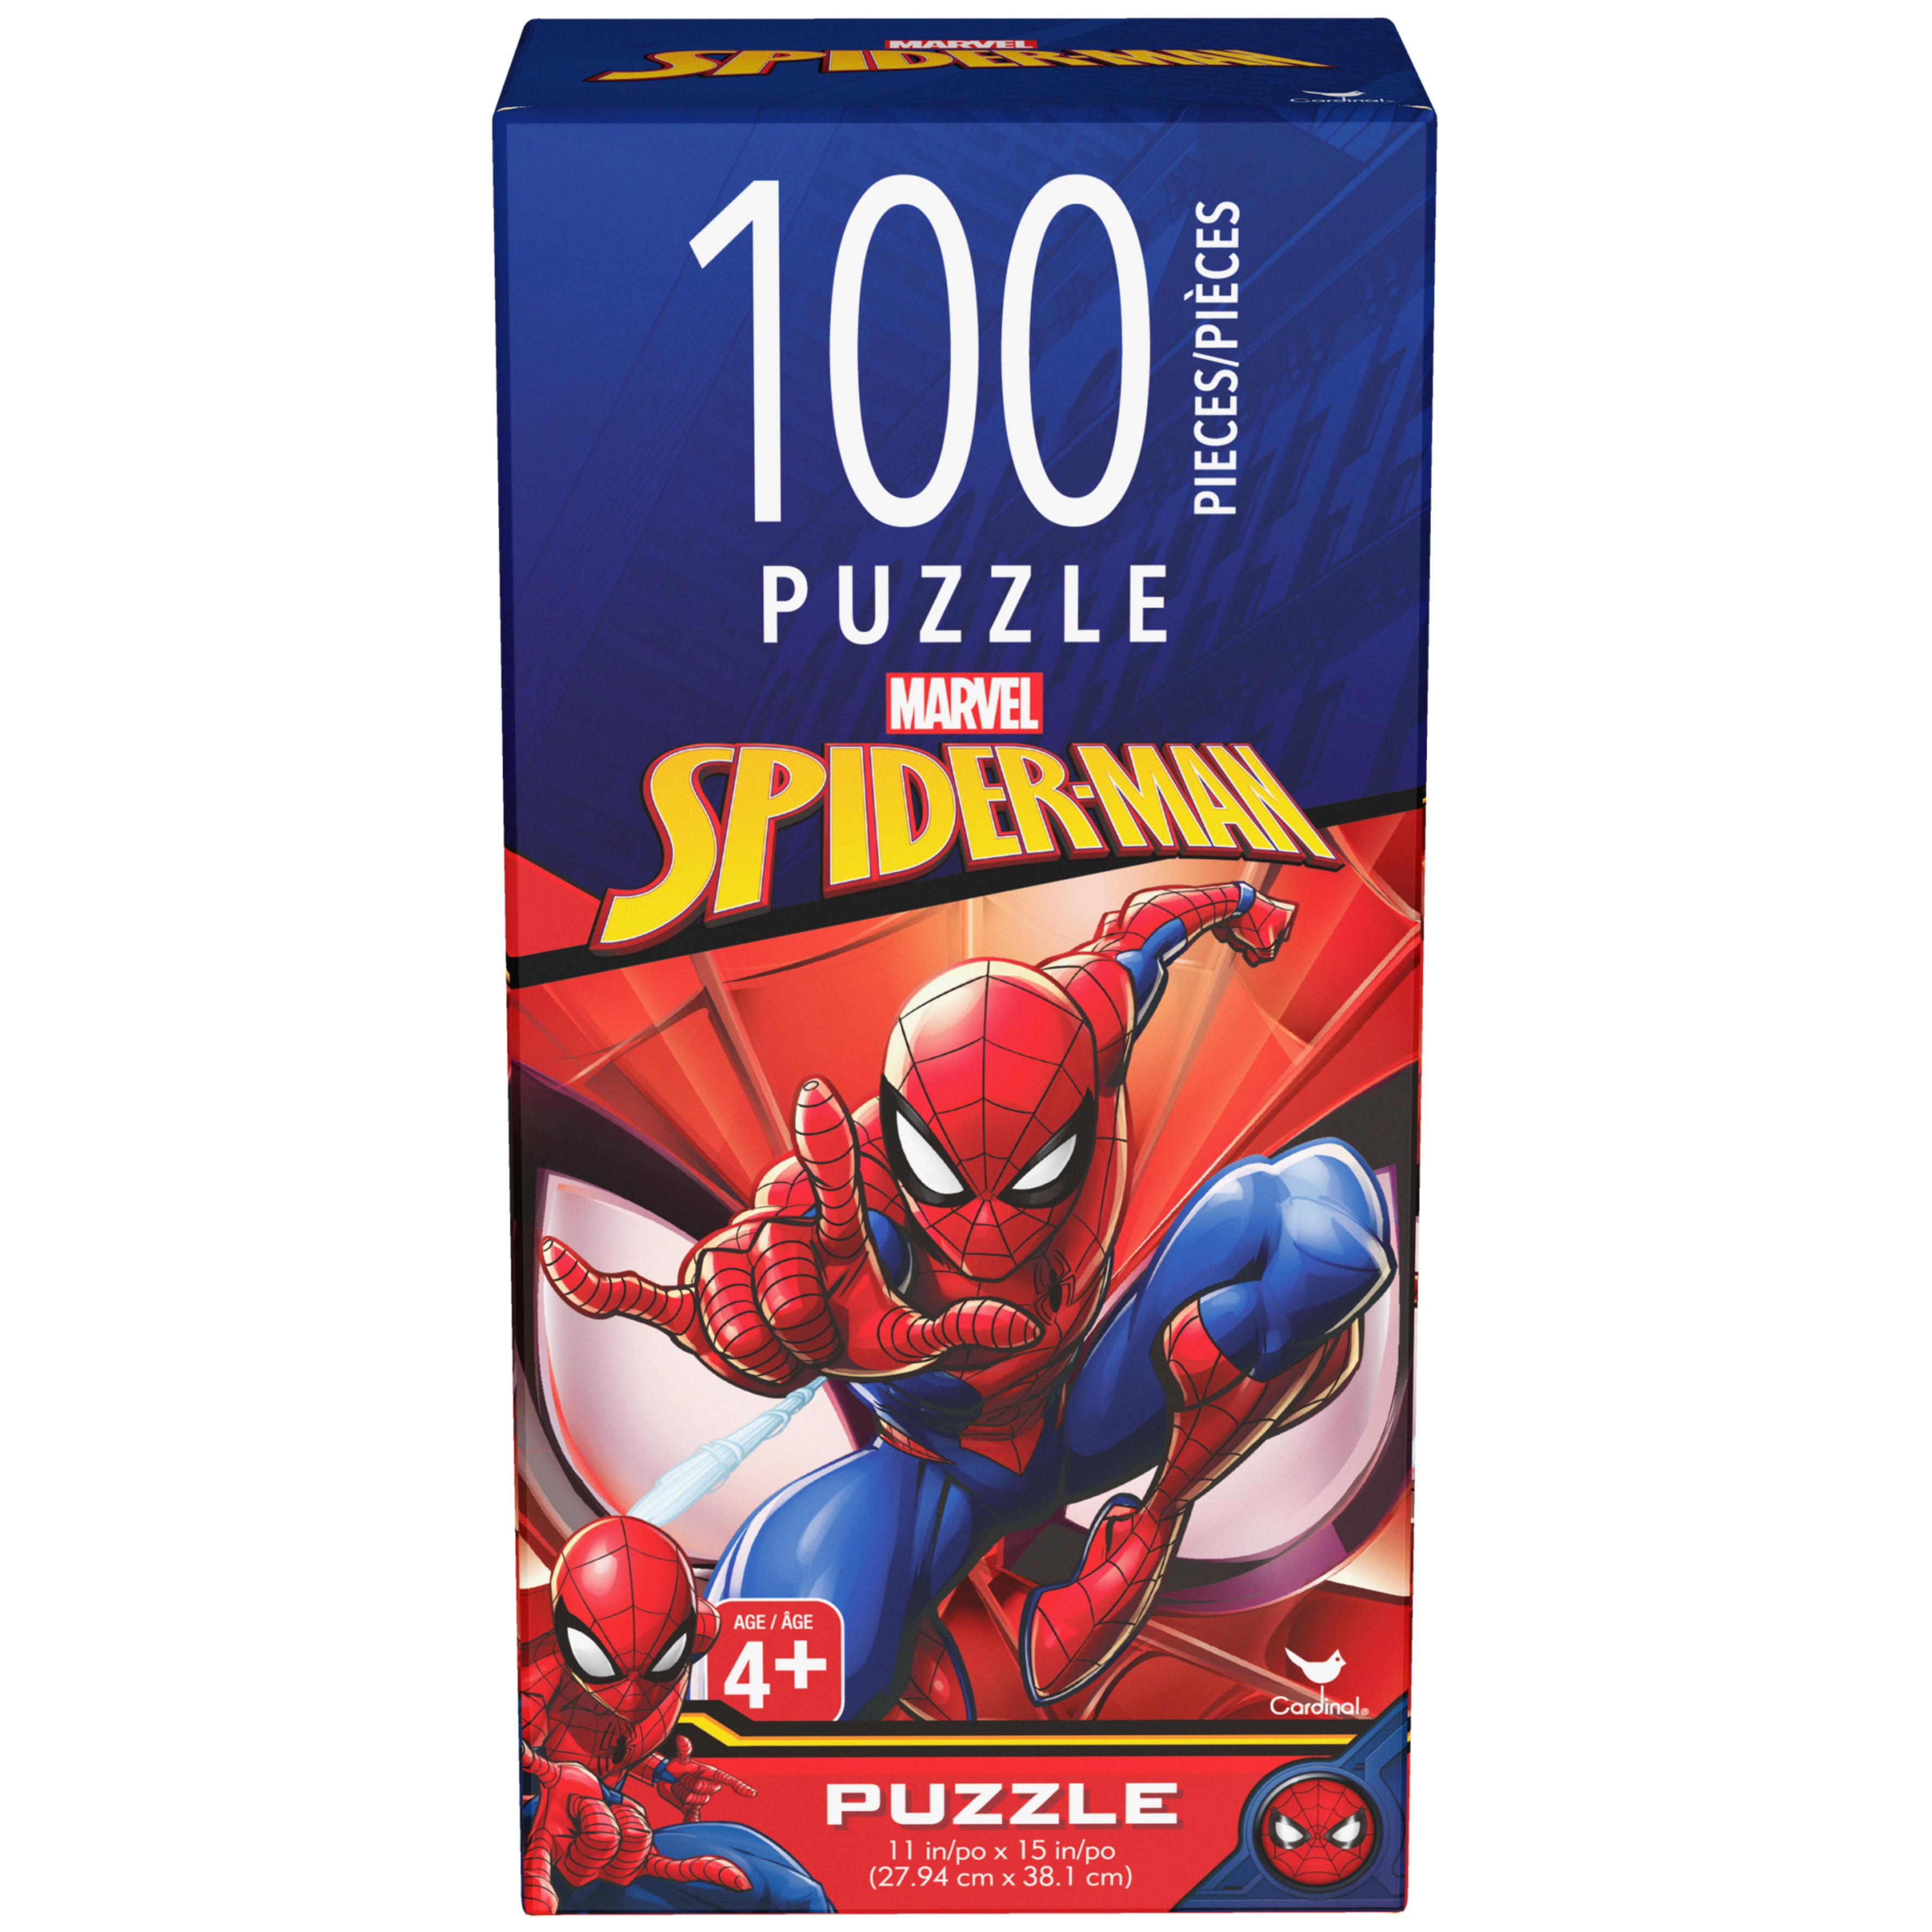 Spider-Man 100-Piece Jigsaw Puzzle, for Families and Kids Ages 4 and up